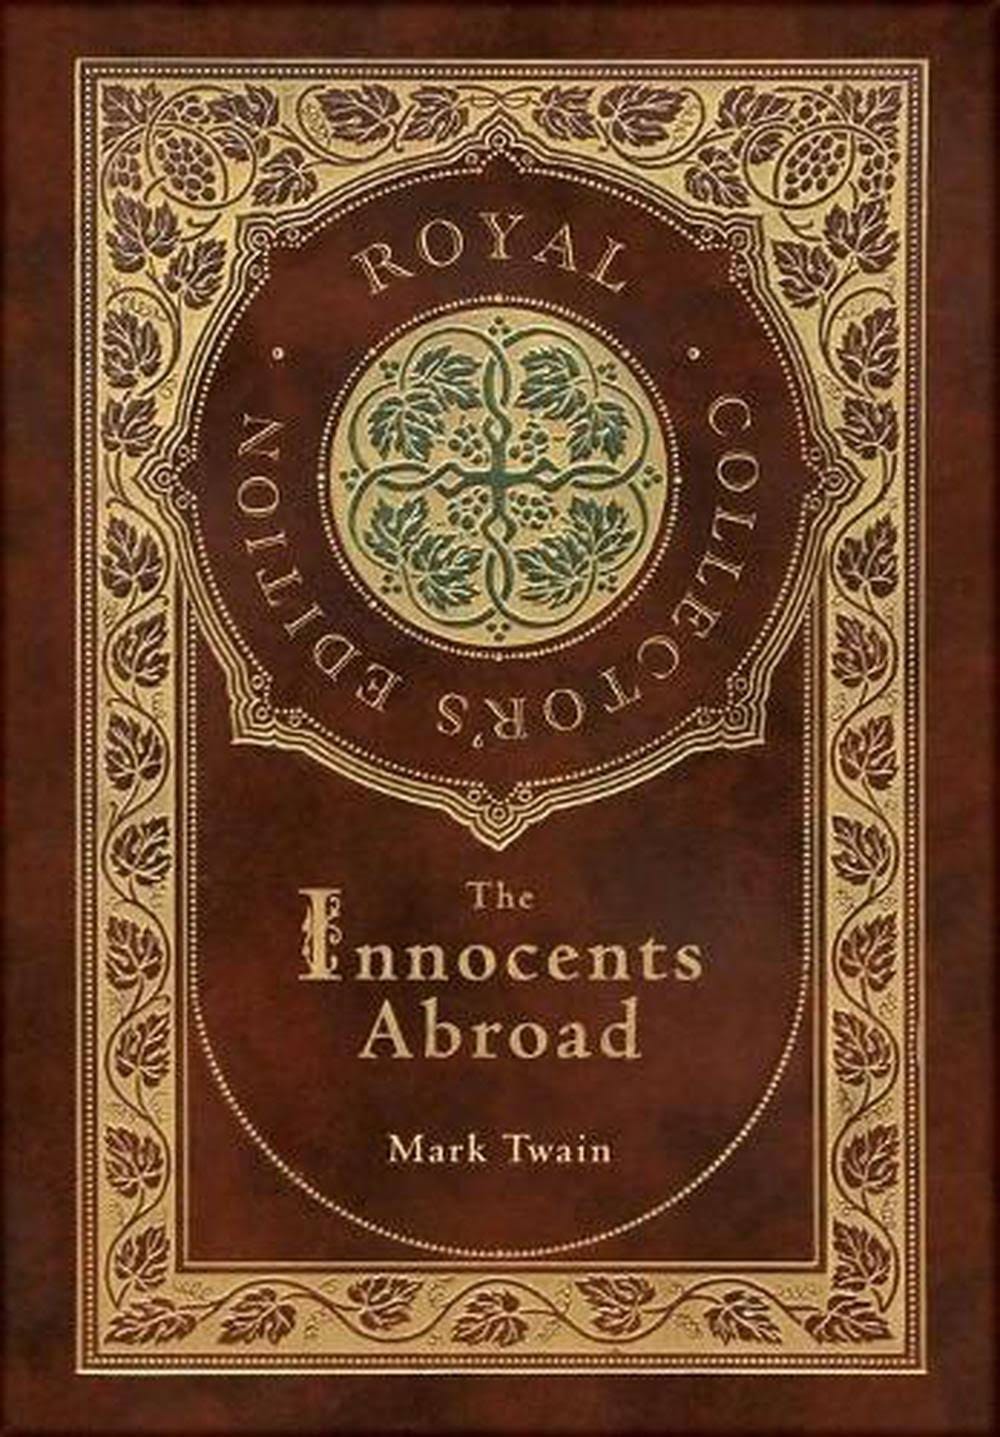 The Innocents Abroad by Mark Twain - Royal Collector's Edition Hardcover | Image